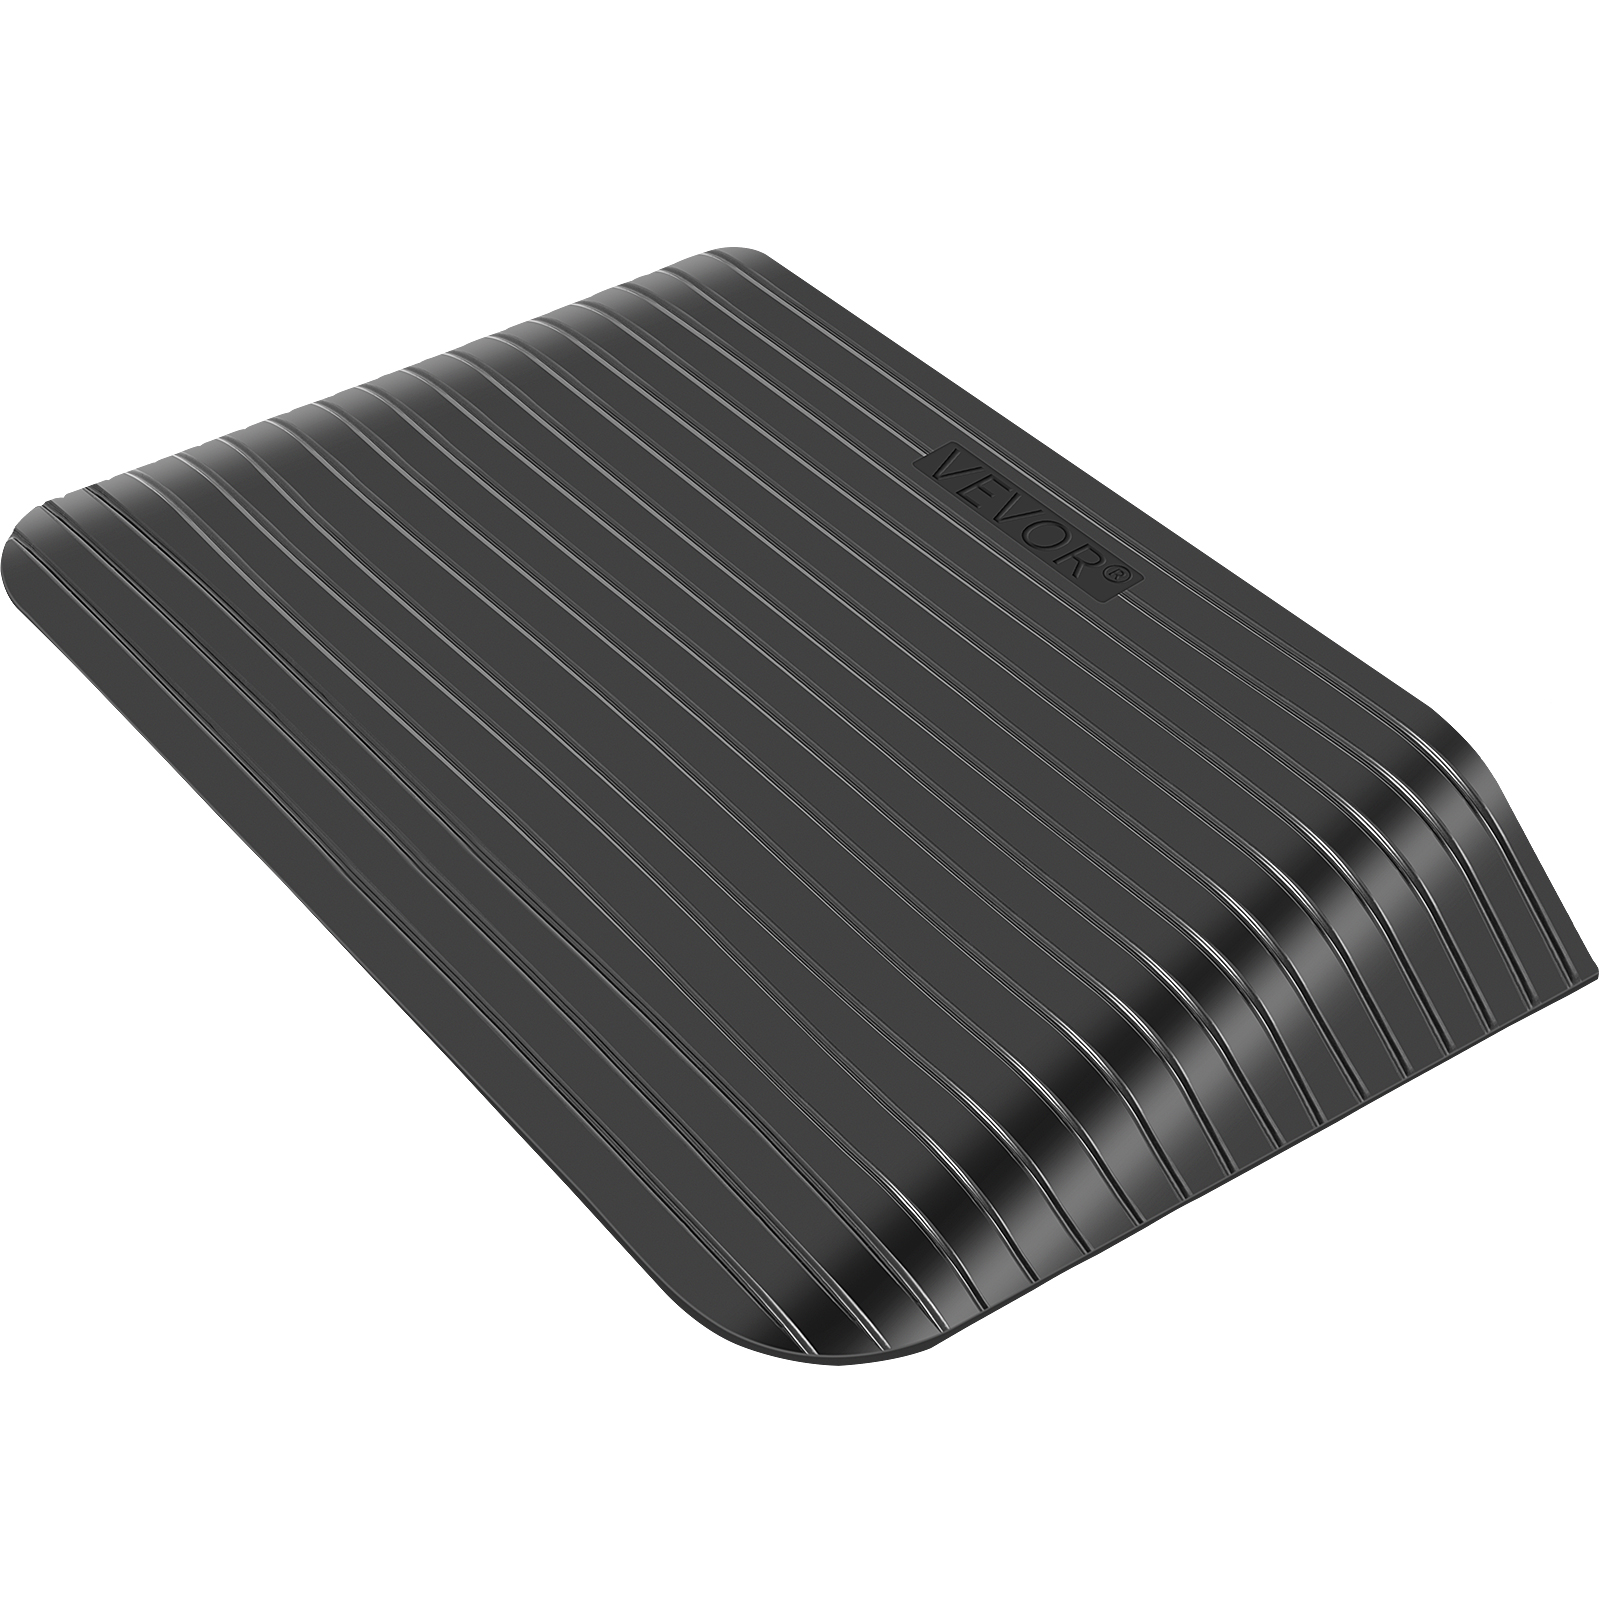 Rubber Threshold Ramp,3in Rise,3 Channels